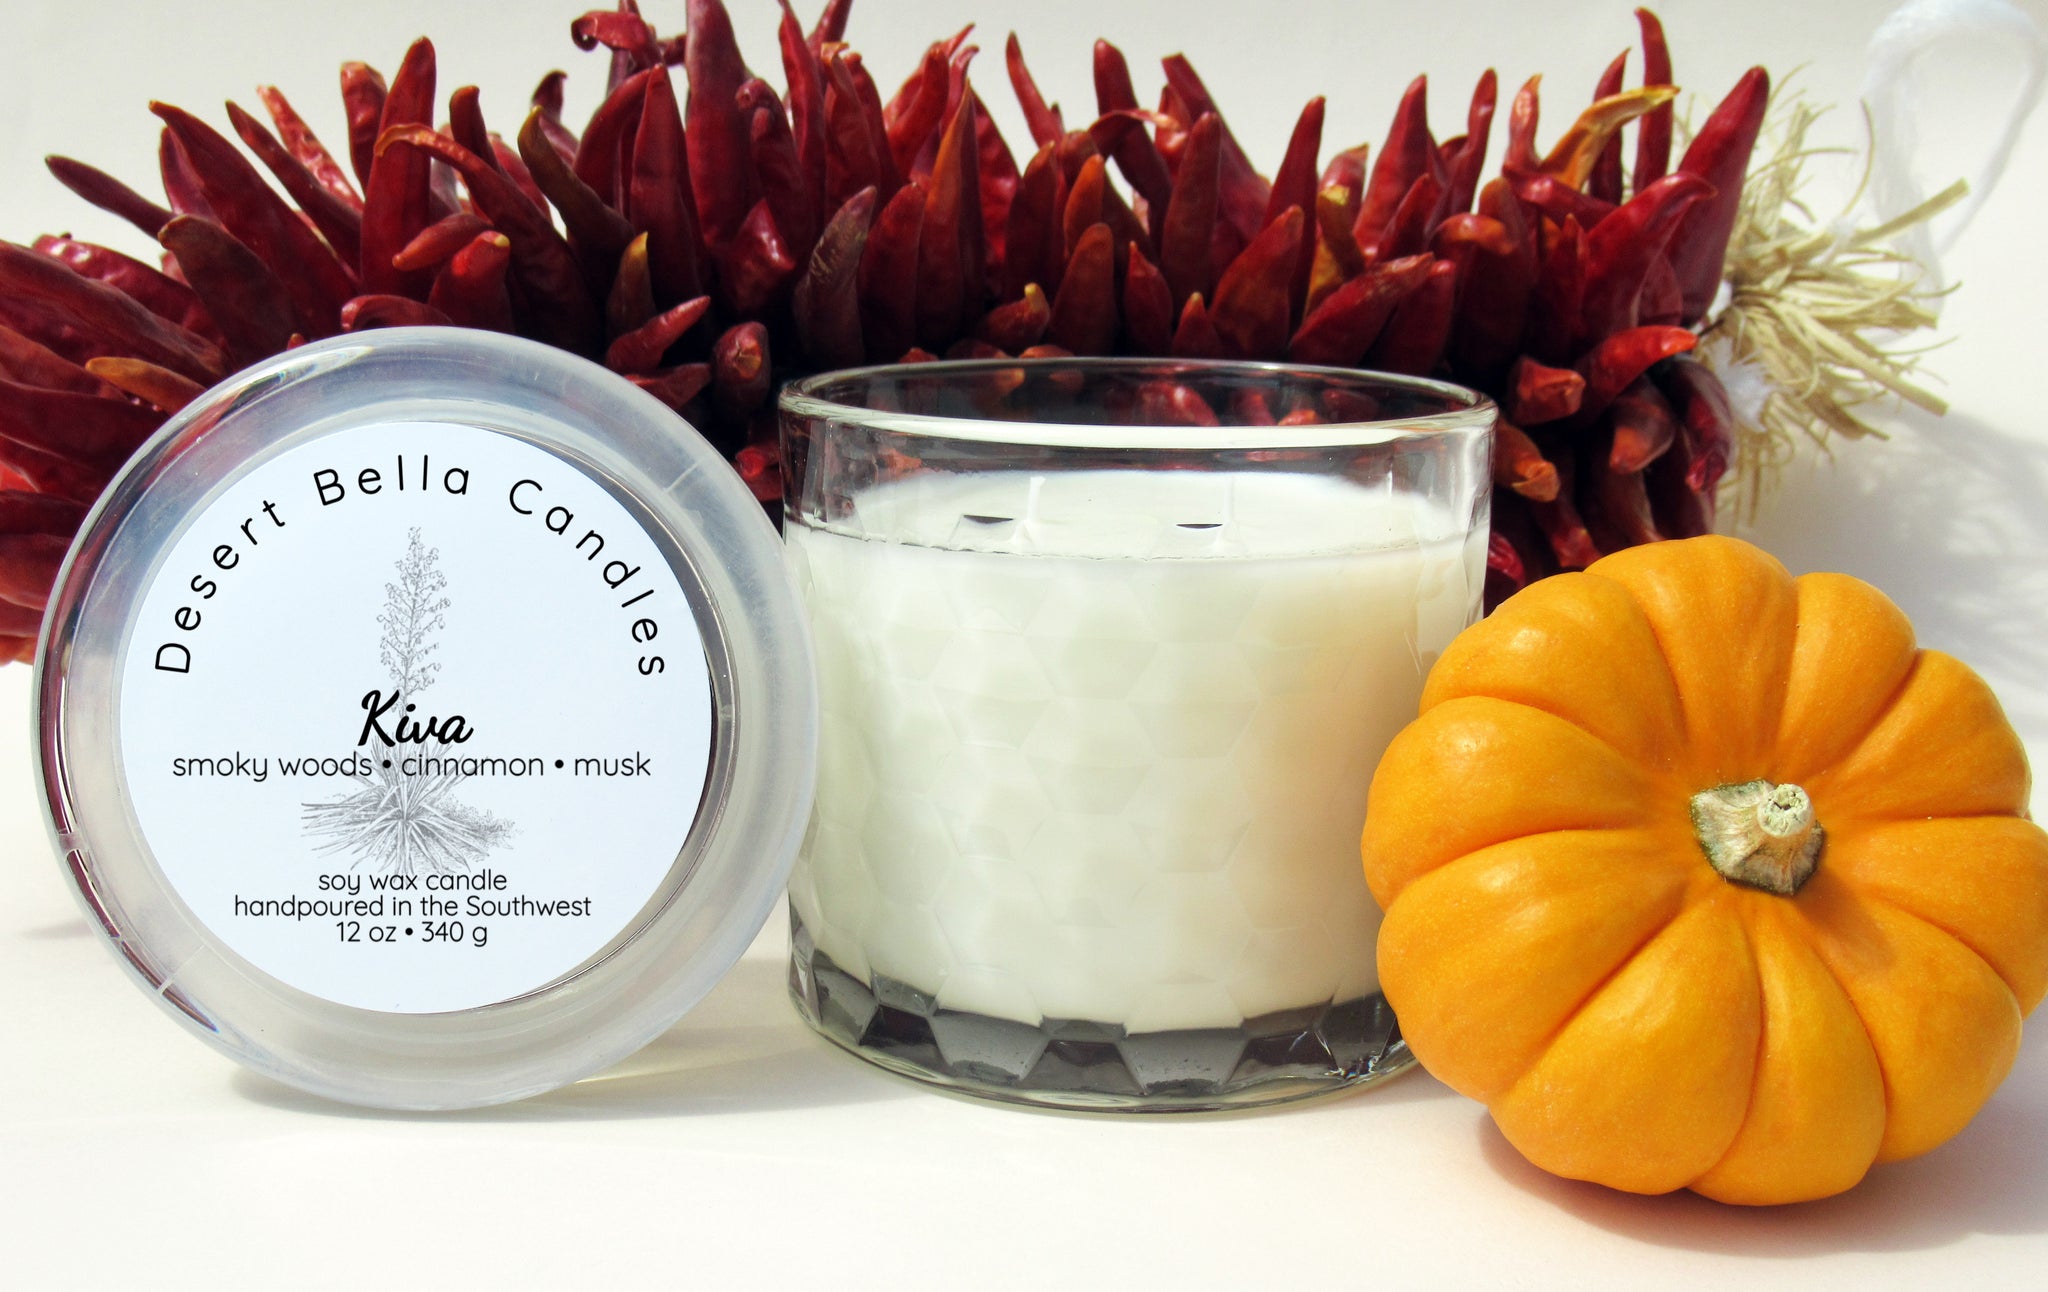 Aspen Winter Scented Soy Candles, 100% Soy Wax Candles, Winter Fragrance,  Cozy Candle Fragrance 